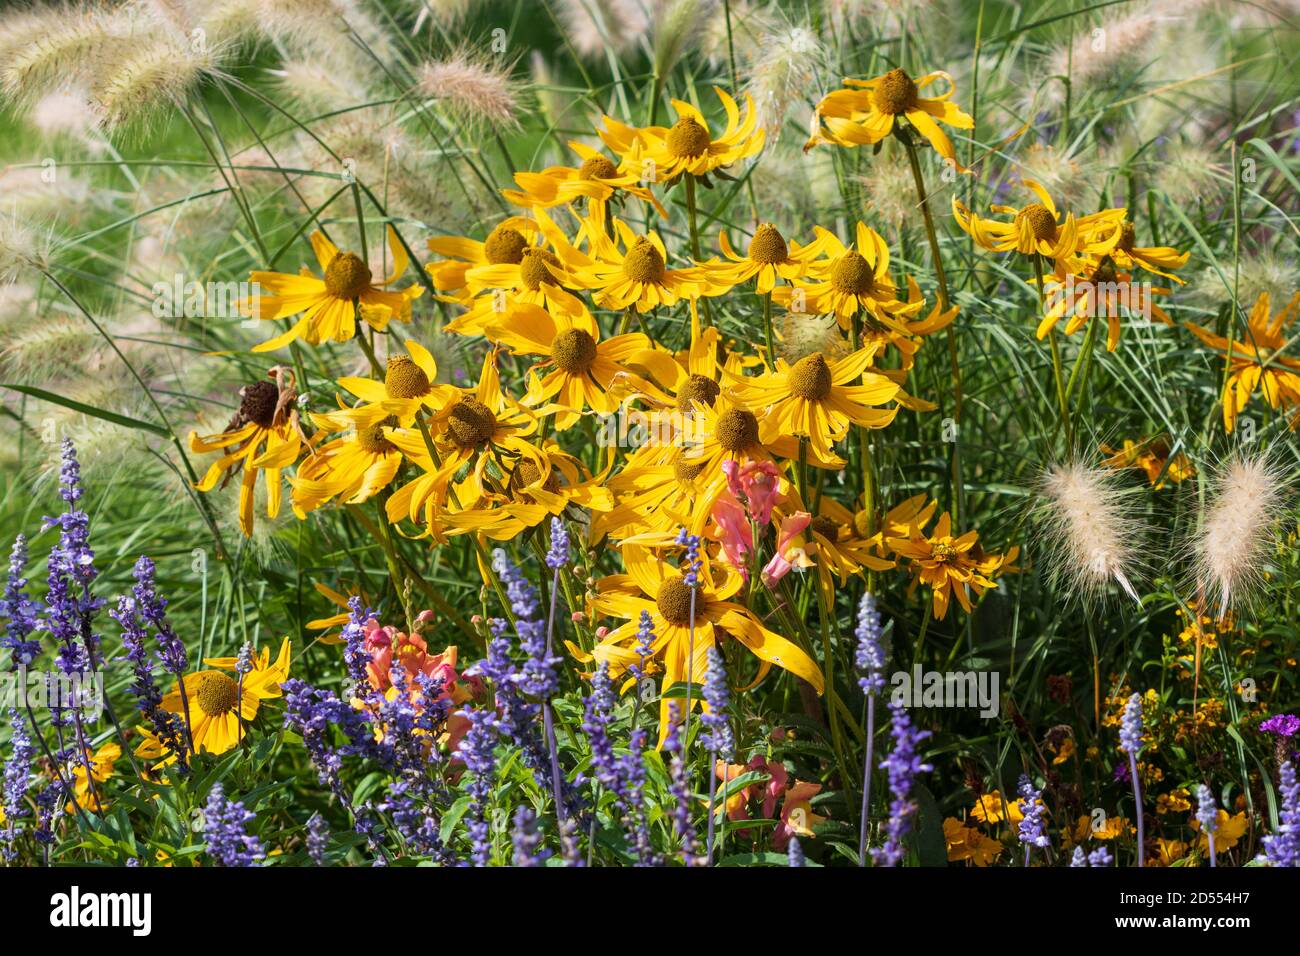 flower bed with yellow coneflowers, blue sage and fountain grasses Stock Photo